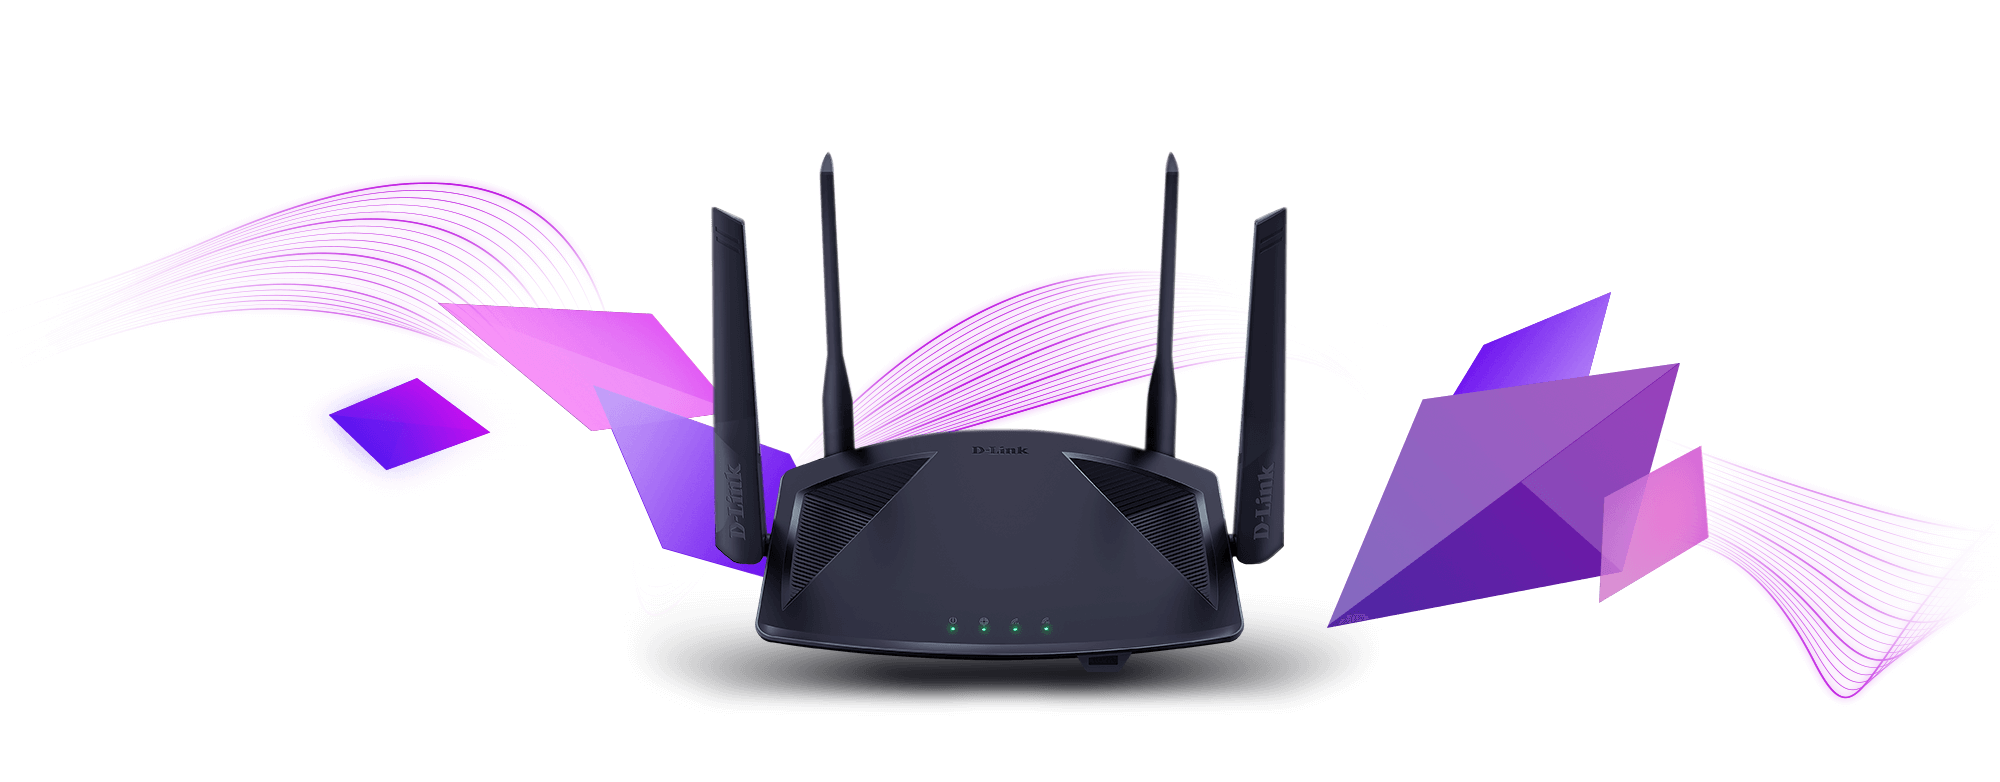 DIR-X1860 AX1800 Wi-Fi 6 Router with purple diamond shapes and wireless waves